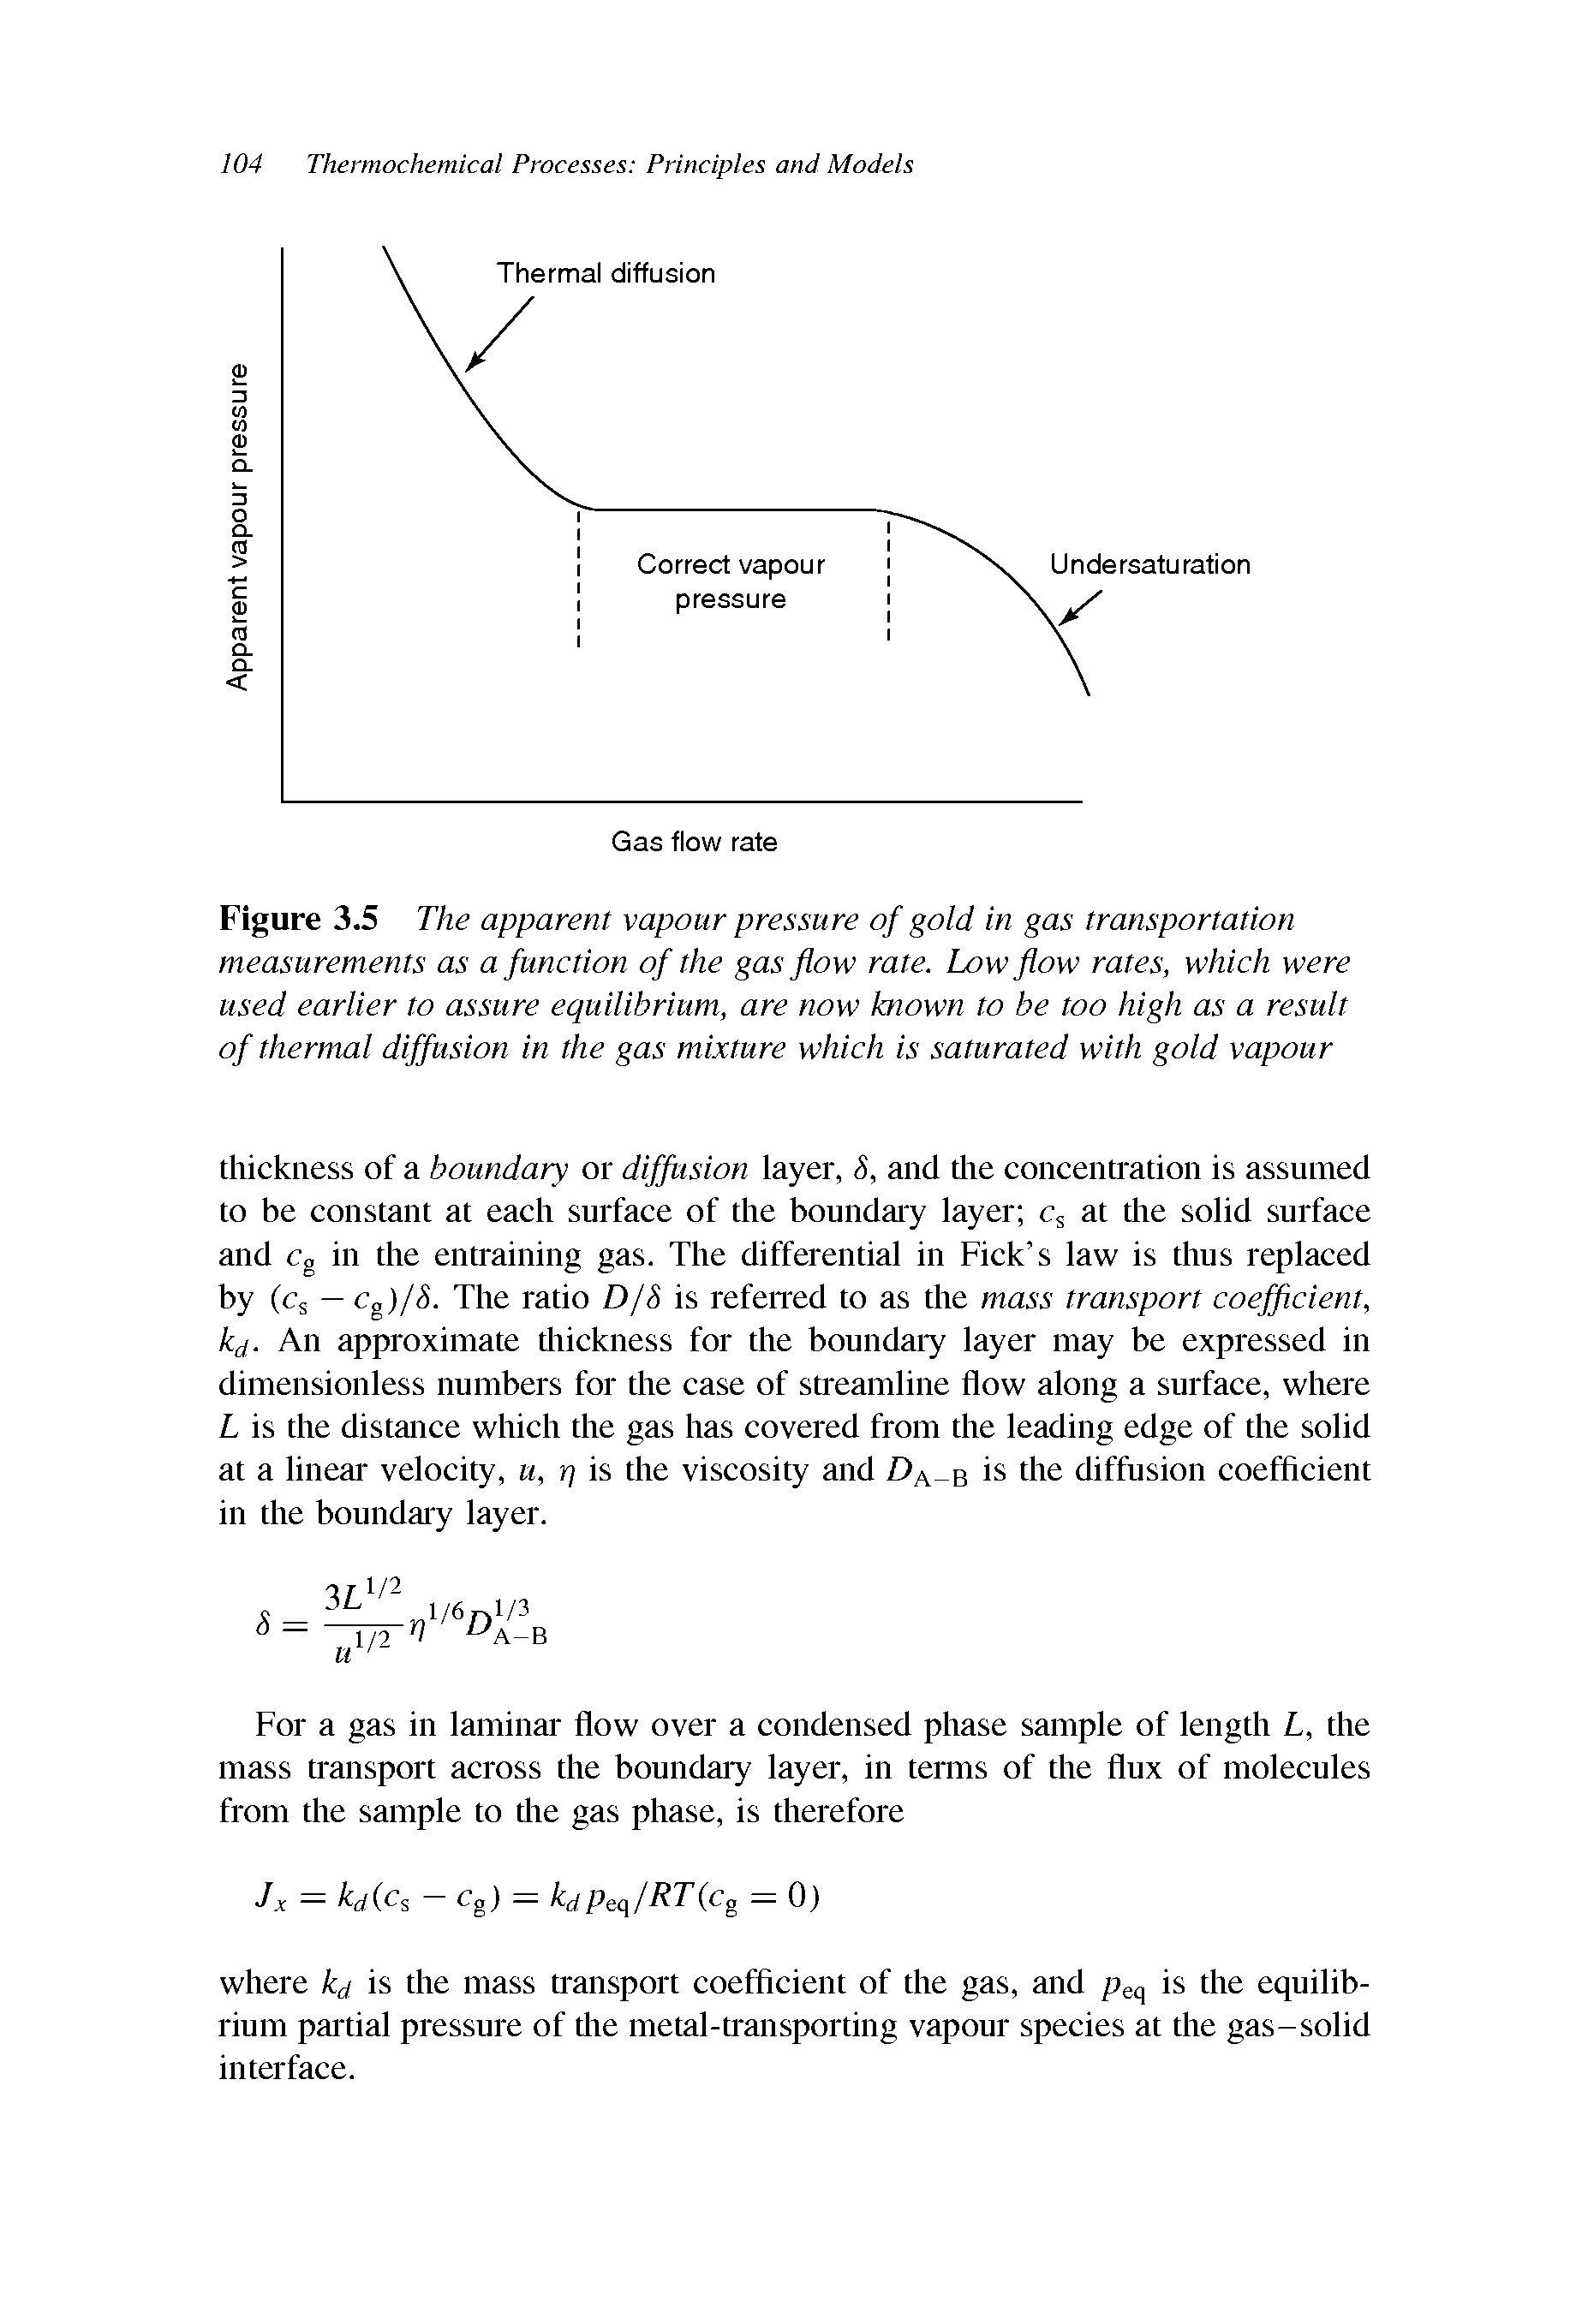 Figure 3.5 The apparent vapour pressure of gold in gas transportation measurements as a function of the gas flow rate. Low flow rates, which were used earlier to assure equilibrium, are now known to be too high as a result of thermal diffusion in the gas mixture which is saturated with gold vapour...